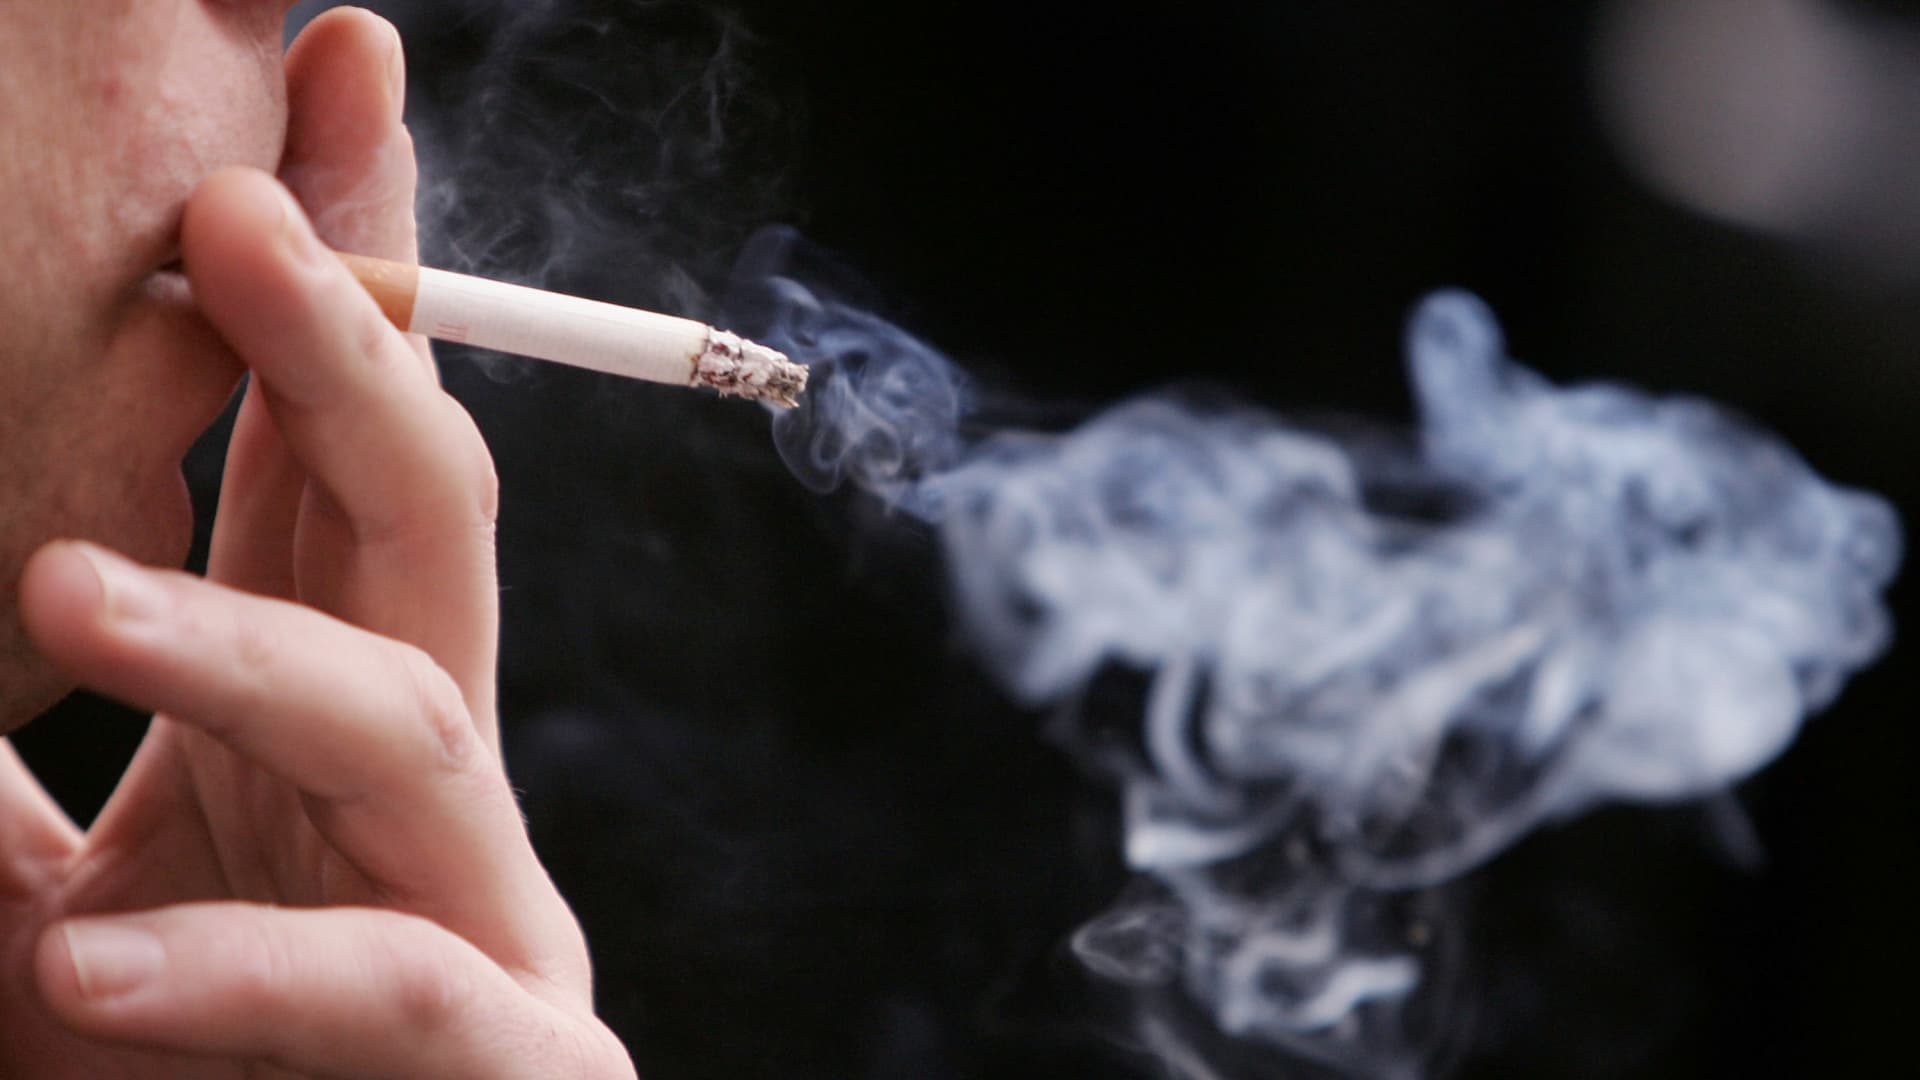 CDC says smoking rates fall to record low in US